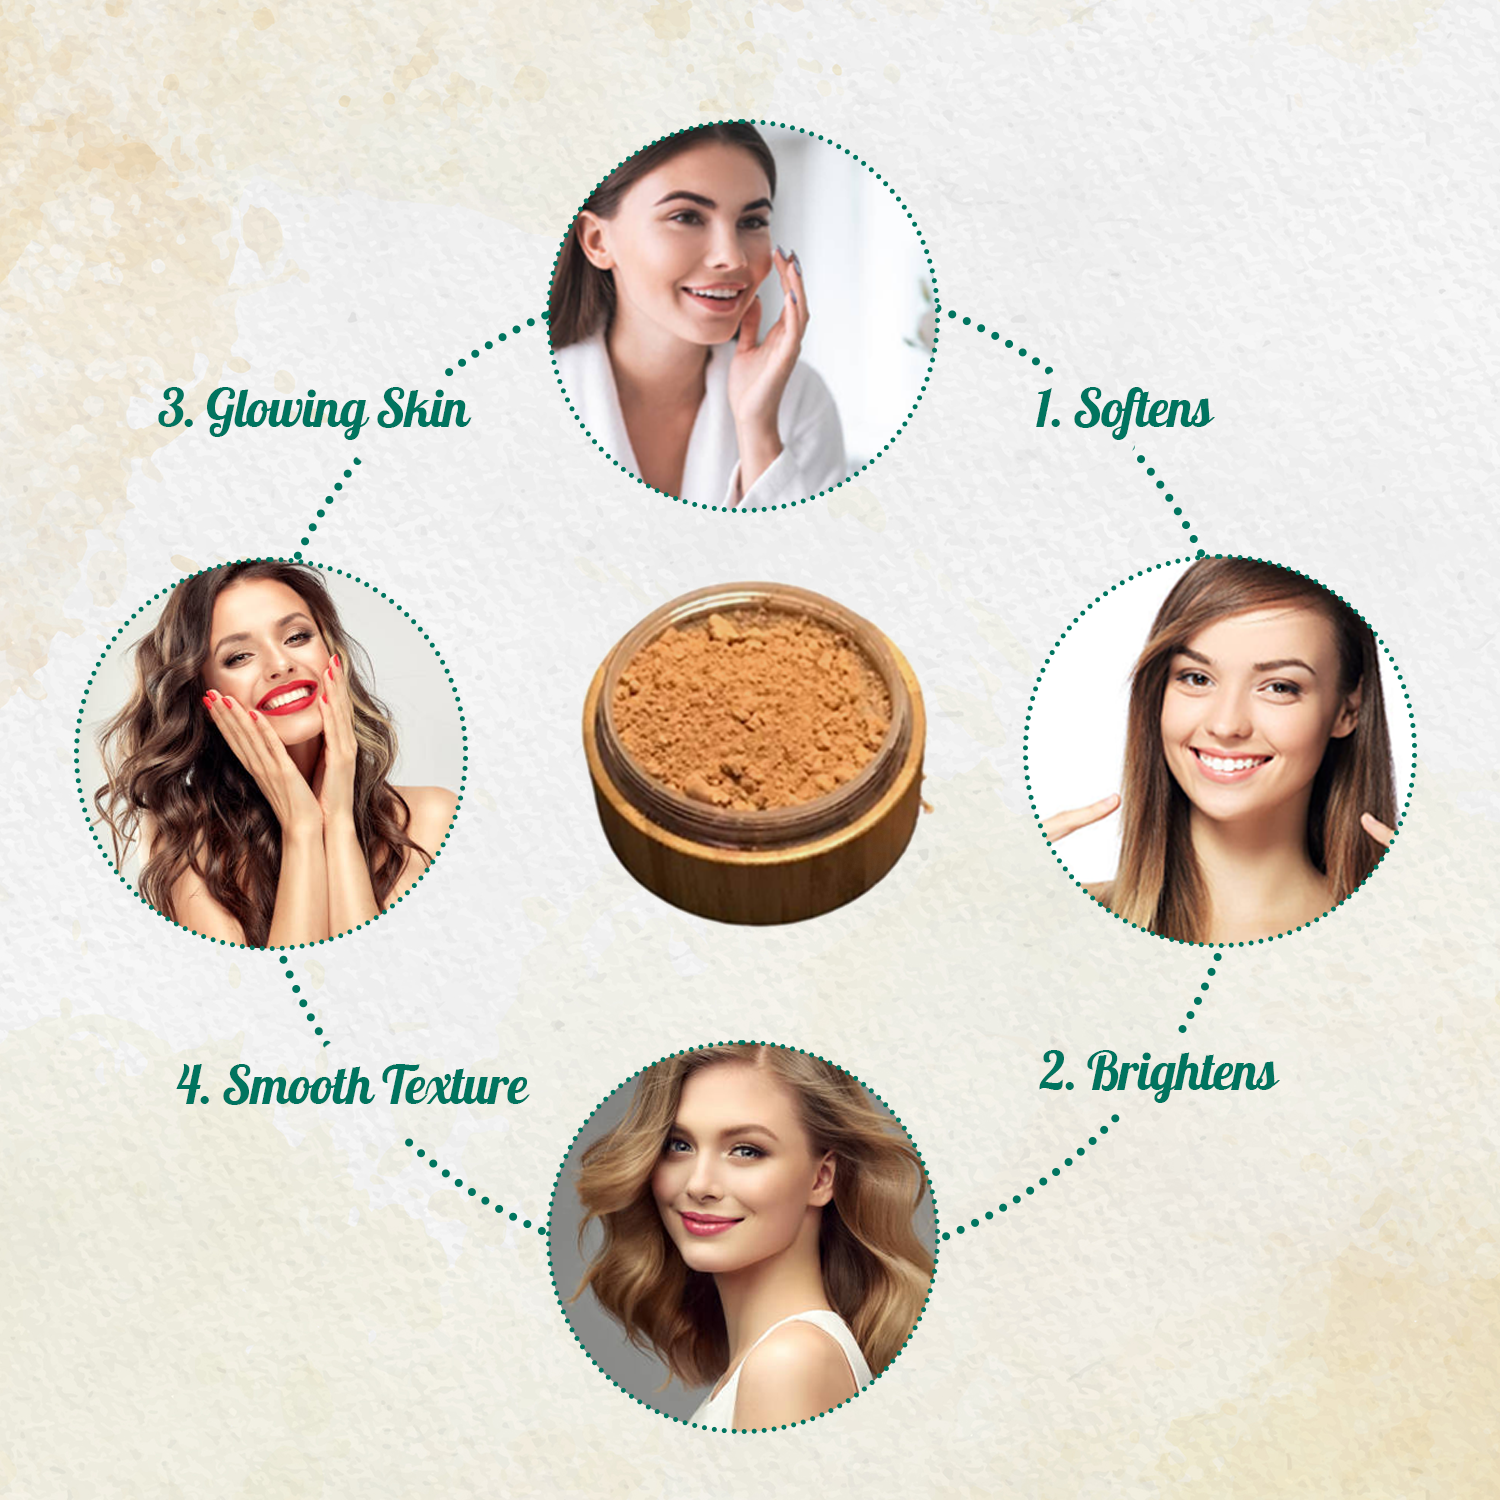 All-Natural Bronzer Loose Powder. Eco-Friendly.